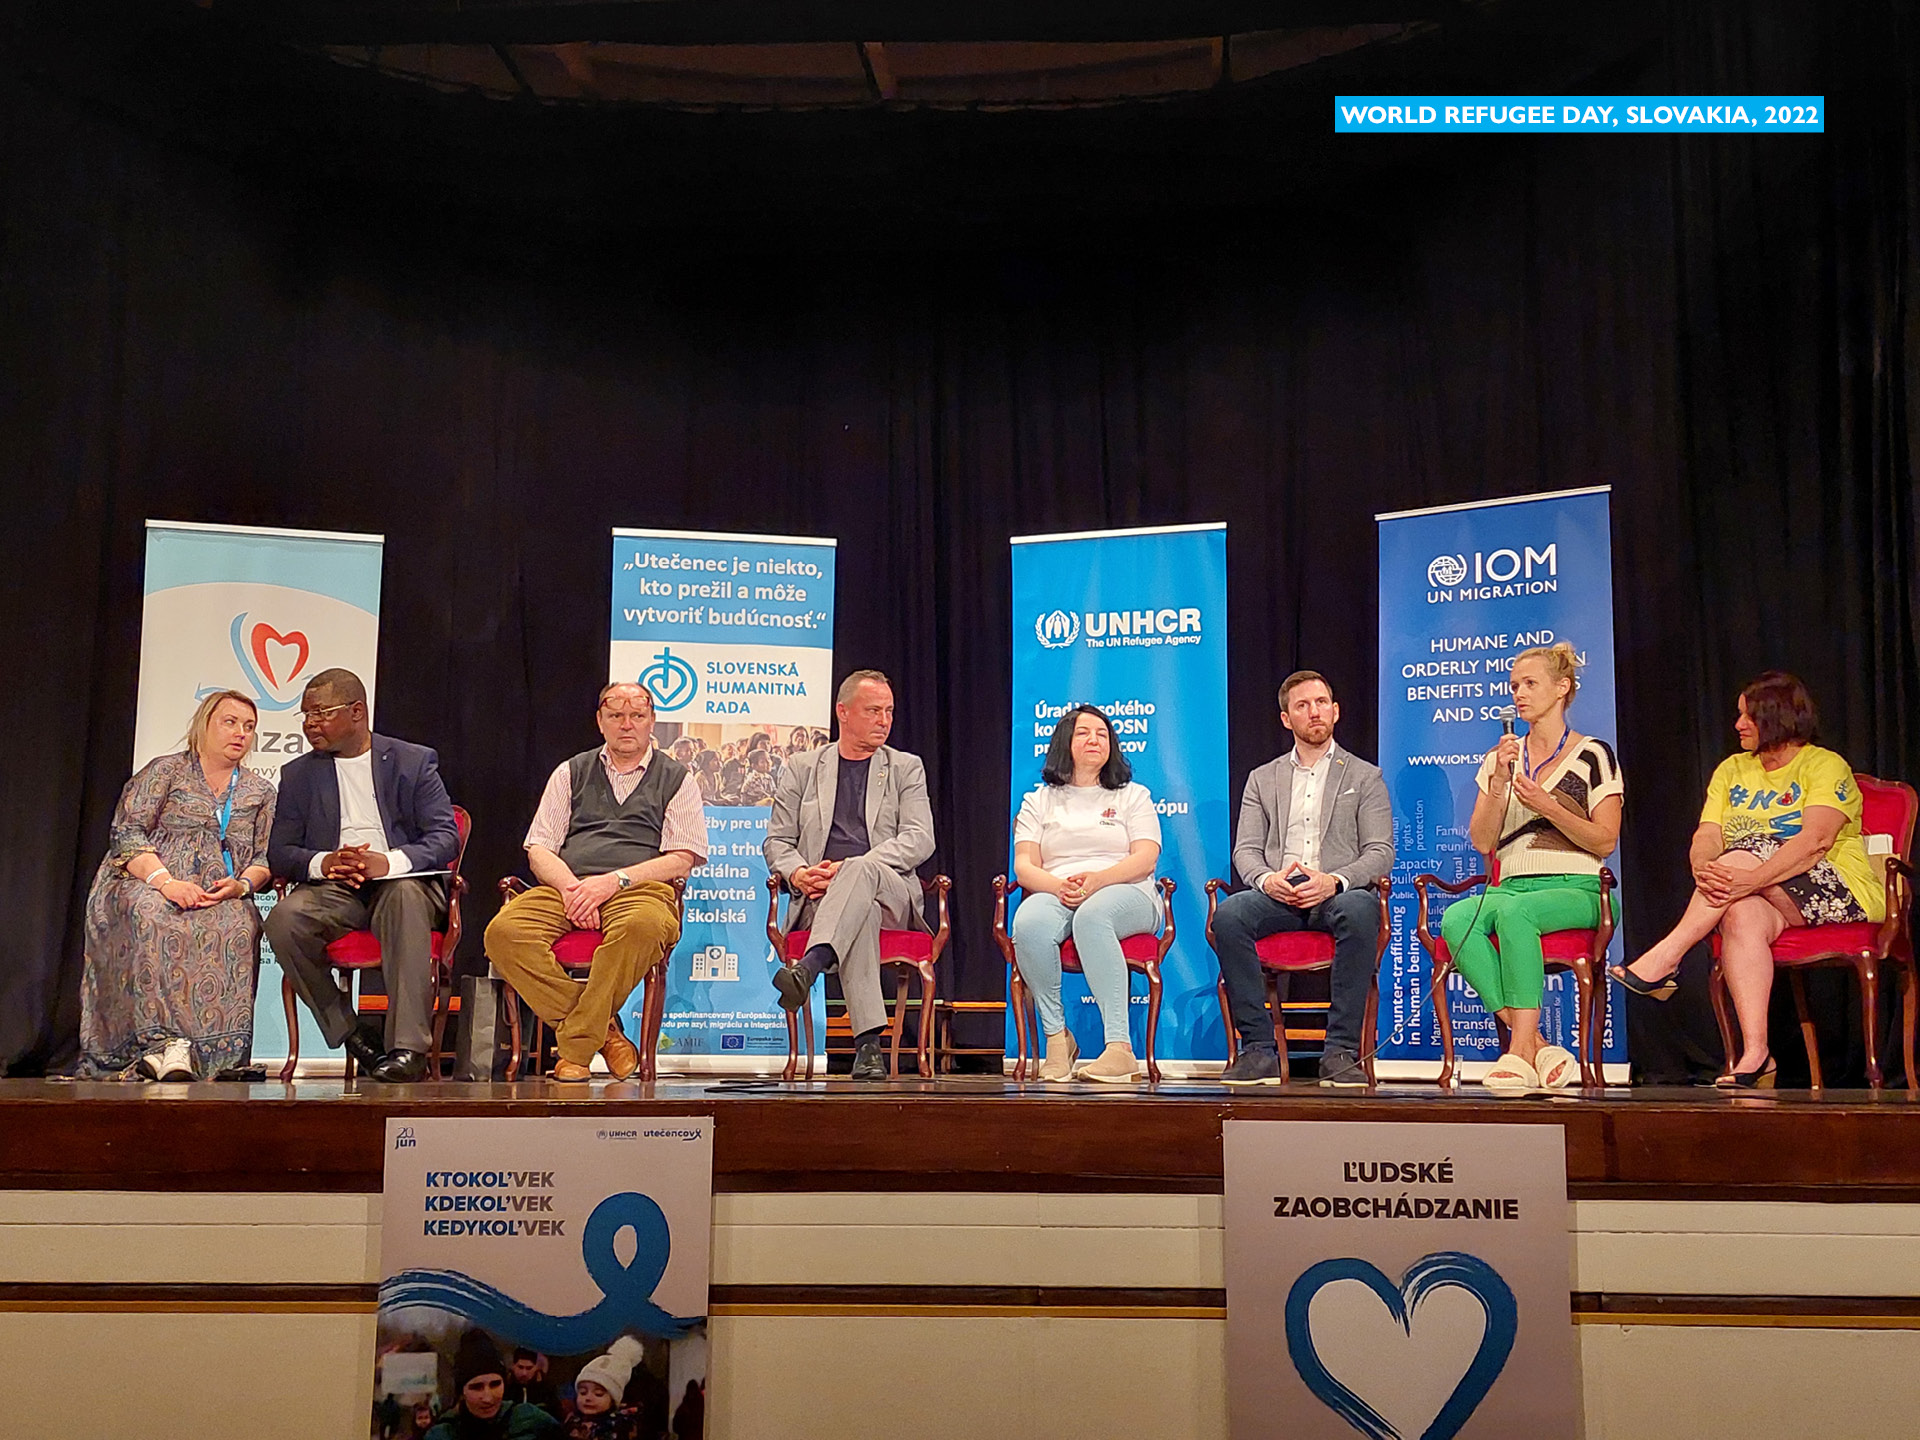 Panel discussion at the event in Košice – World Refuee Day 2022. Photo © International Organization for Migration (IOM) 2022.